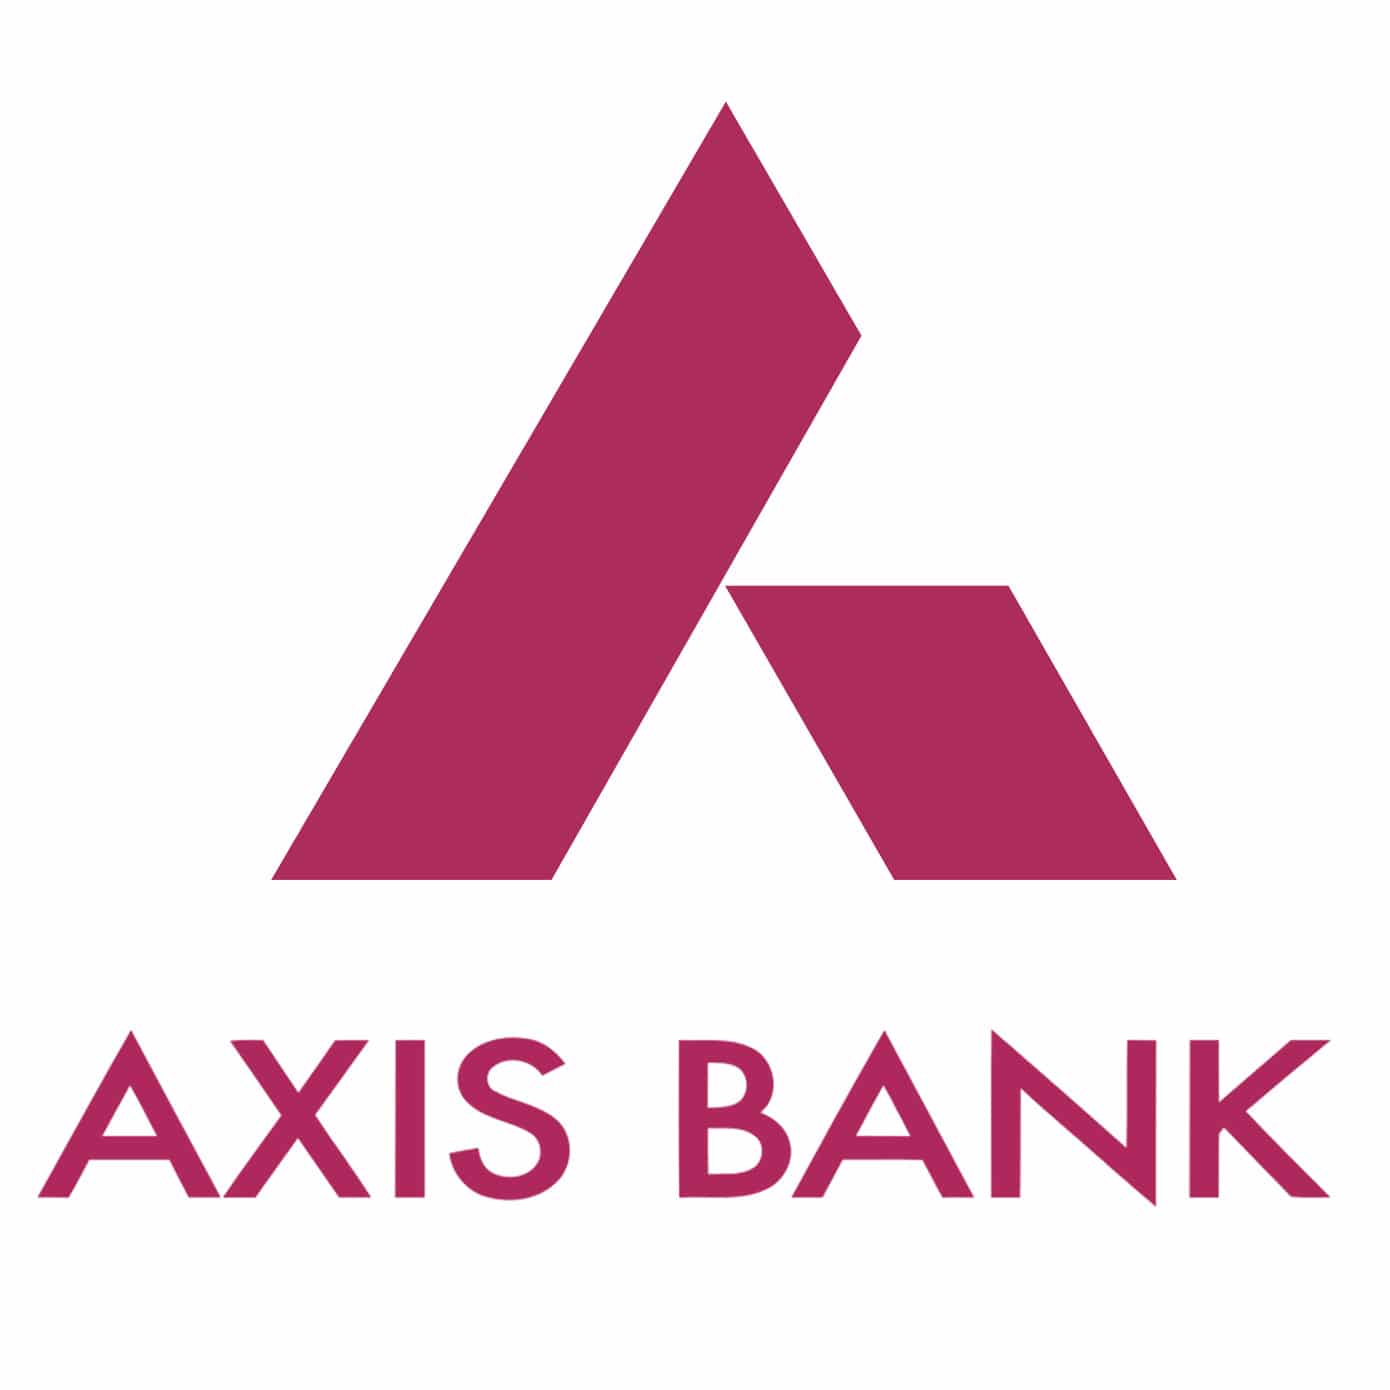 Axis Bank top Nifty gainer as Q4 results impress Street; brokerages remain bullish